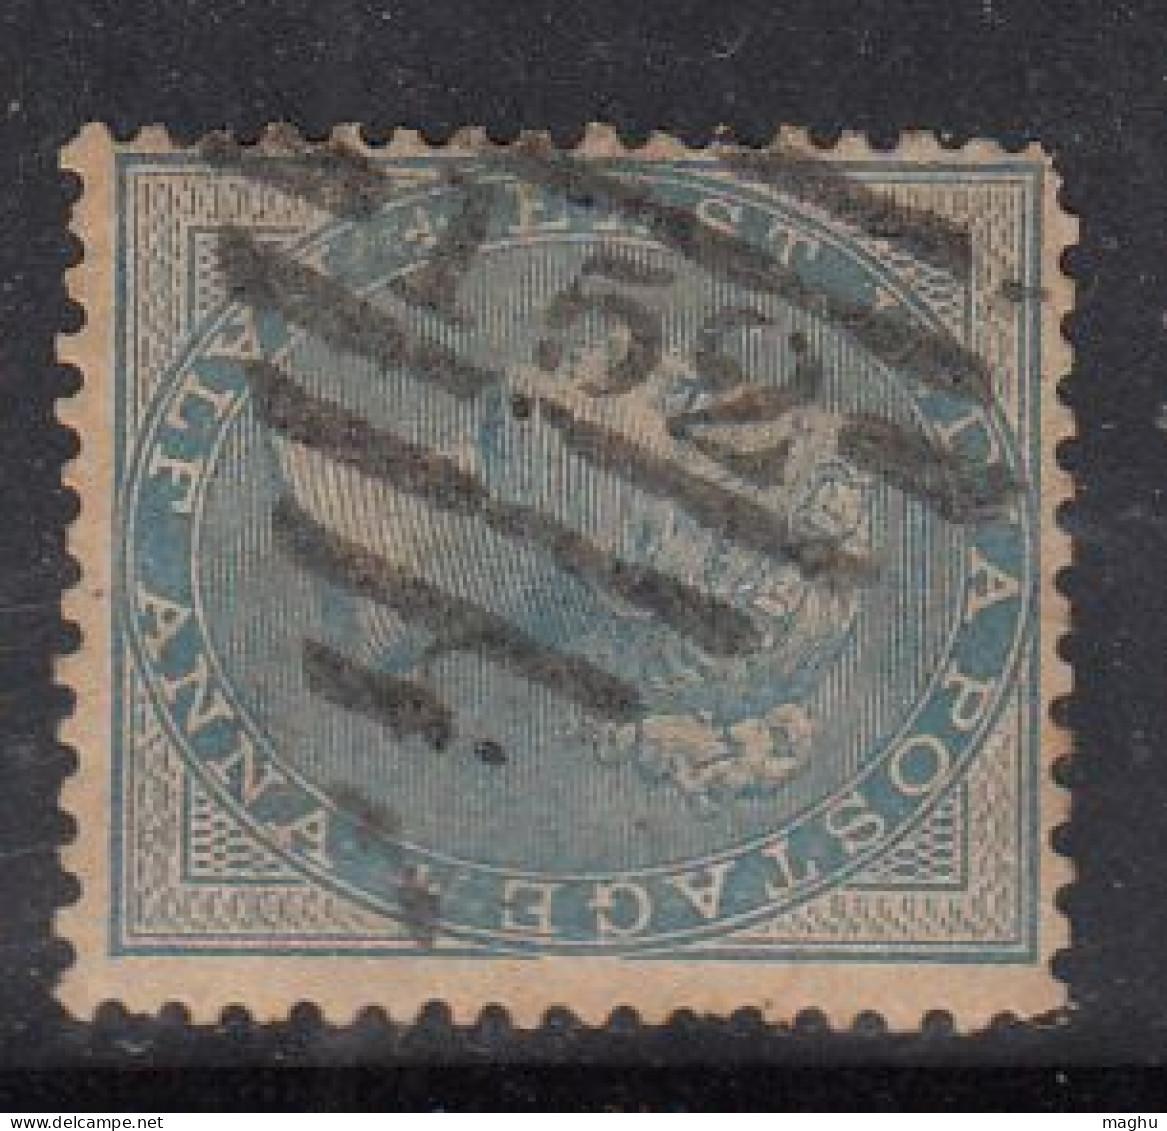 152 Tranquebar Madras Circle Cooper Renouf 12a British East India Used Early Indian Cancellations Danish Denmark Norway - 1854 Britische Indien-Kompanie